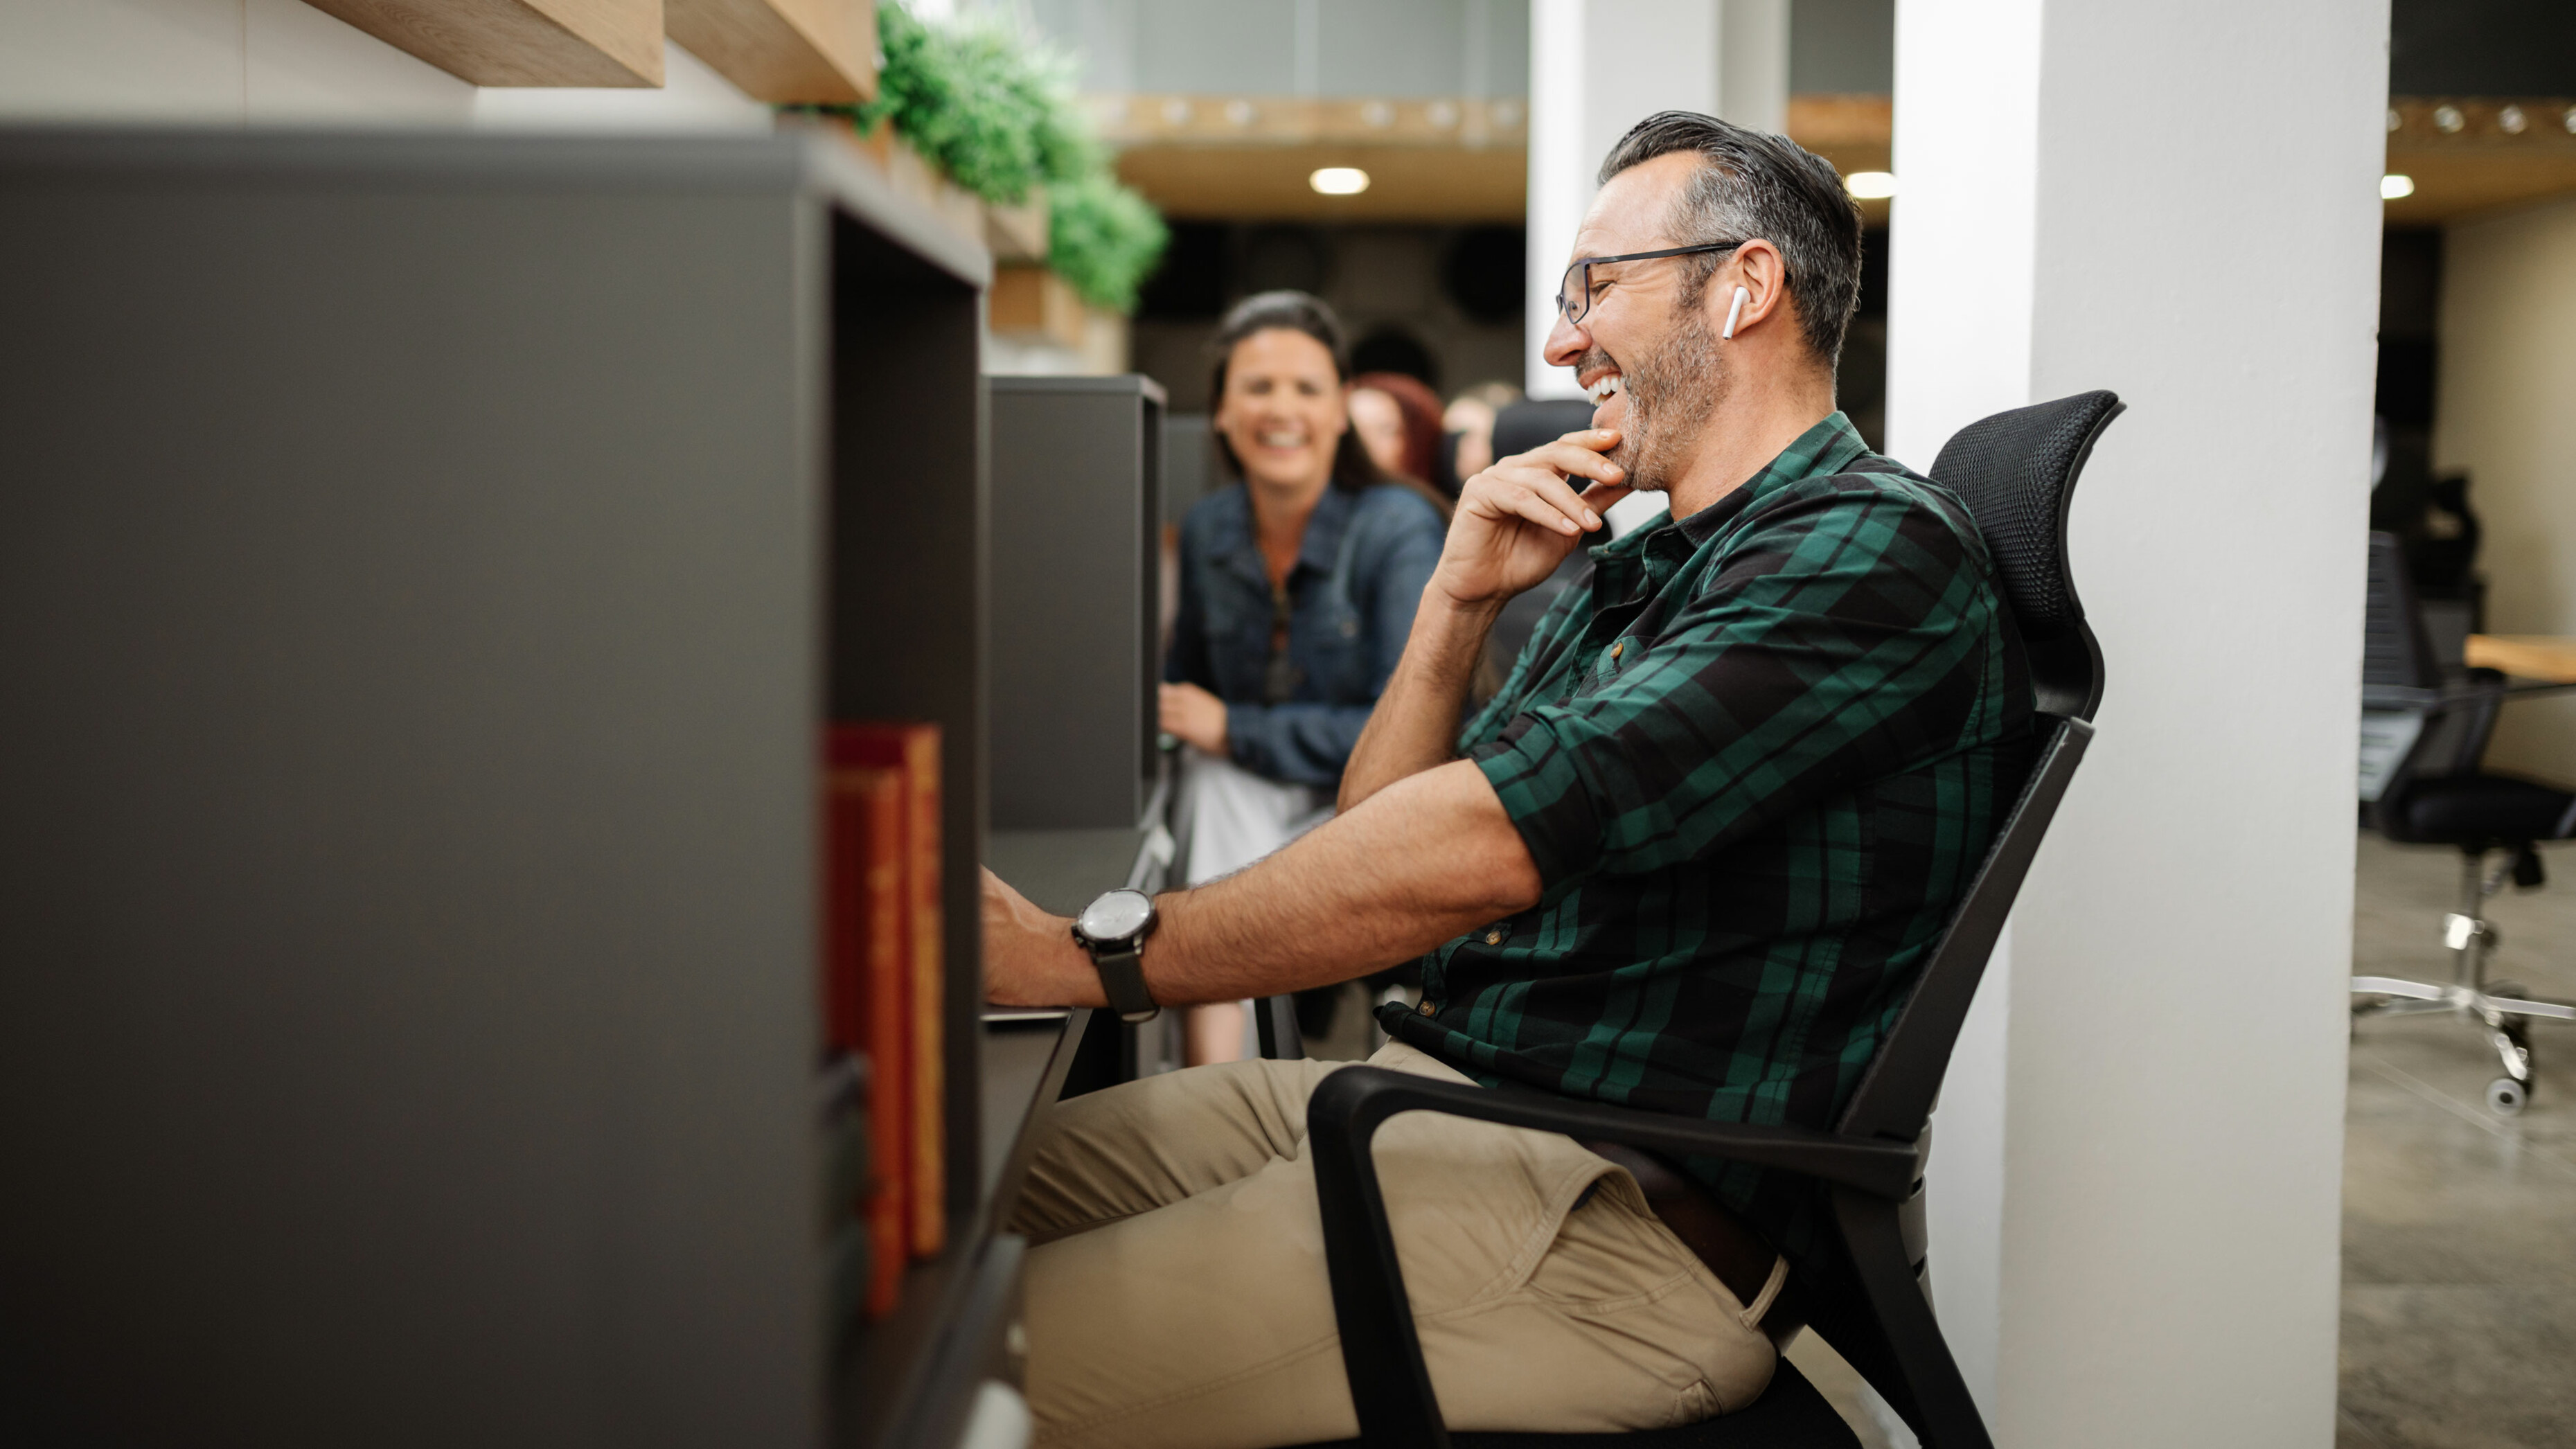 Man sitting at a cubical desk smiling and laughing as coworker next to him smiles